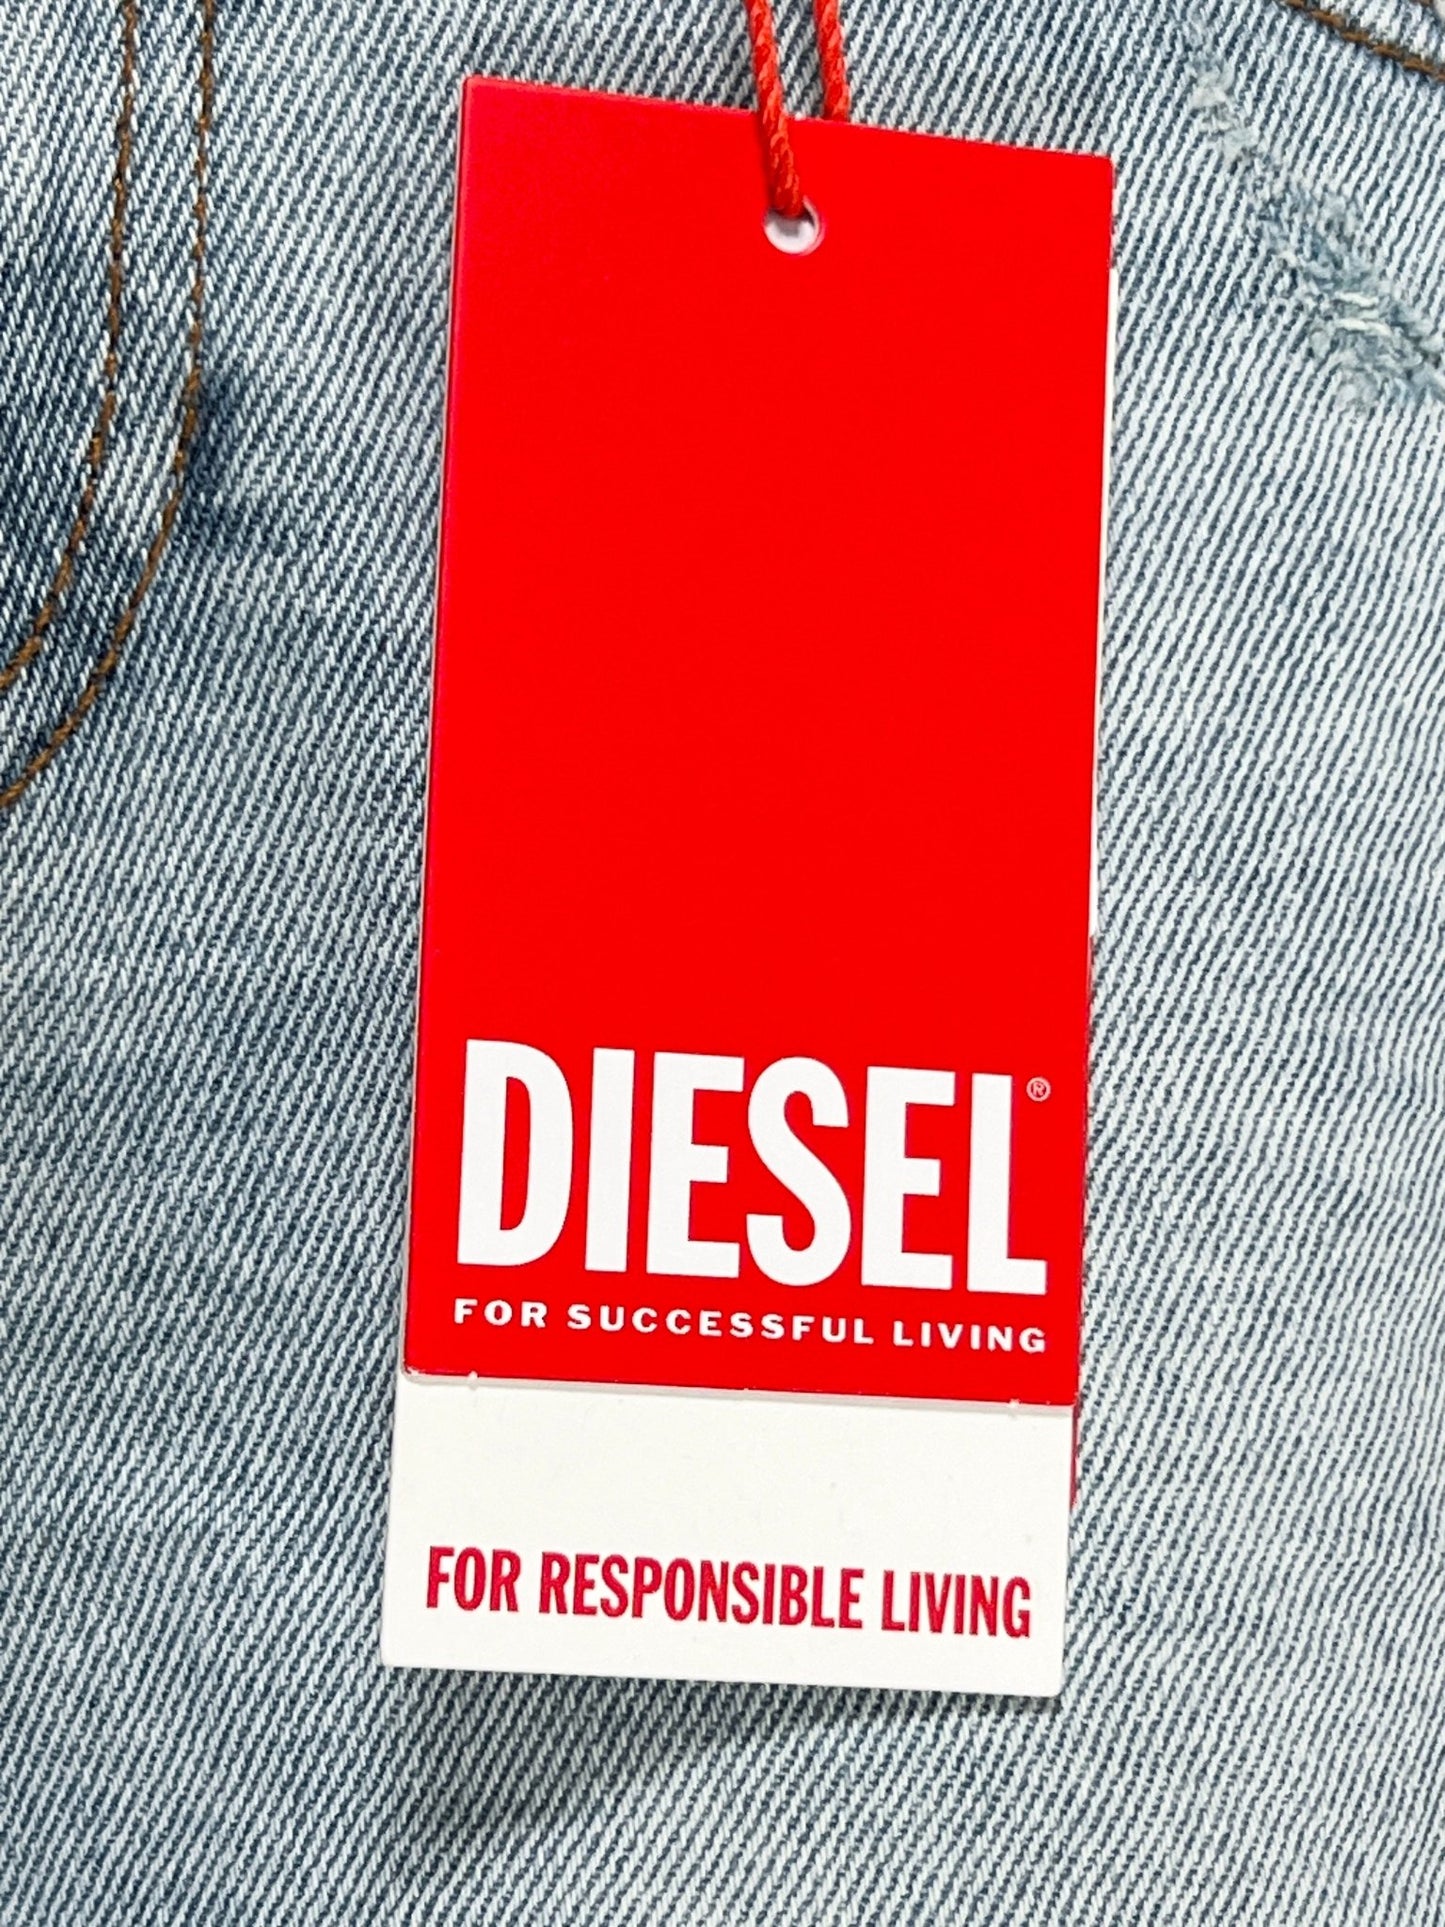 DIESEL 1979 SLEENKER 9H73 brand stretch denim clothing tag with the slogans "for successful living" and "for responsible living" on a gray fabric background.